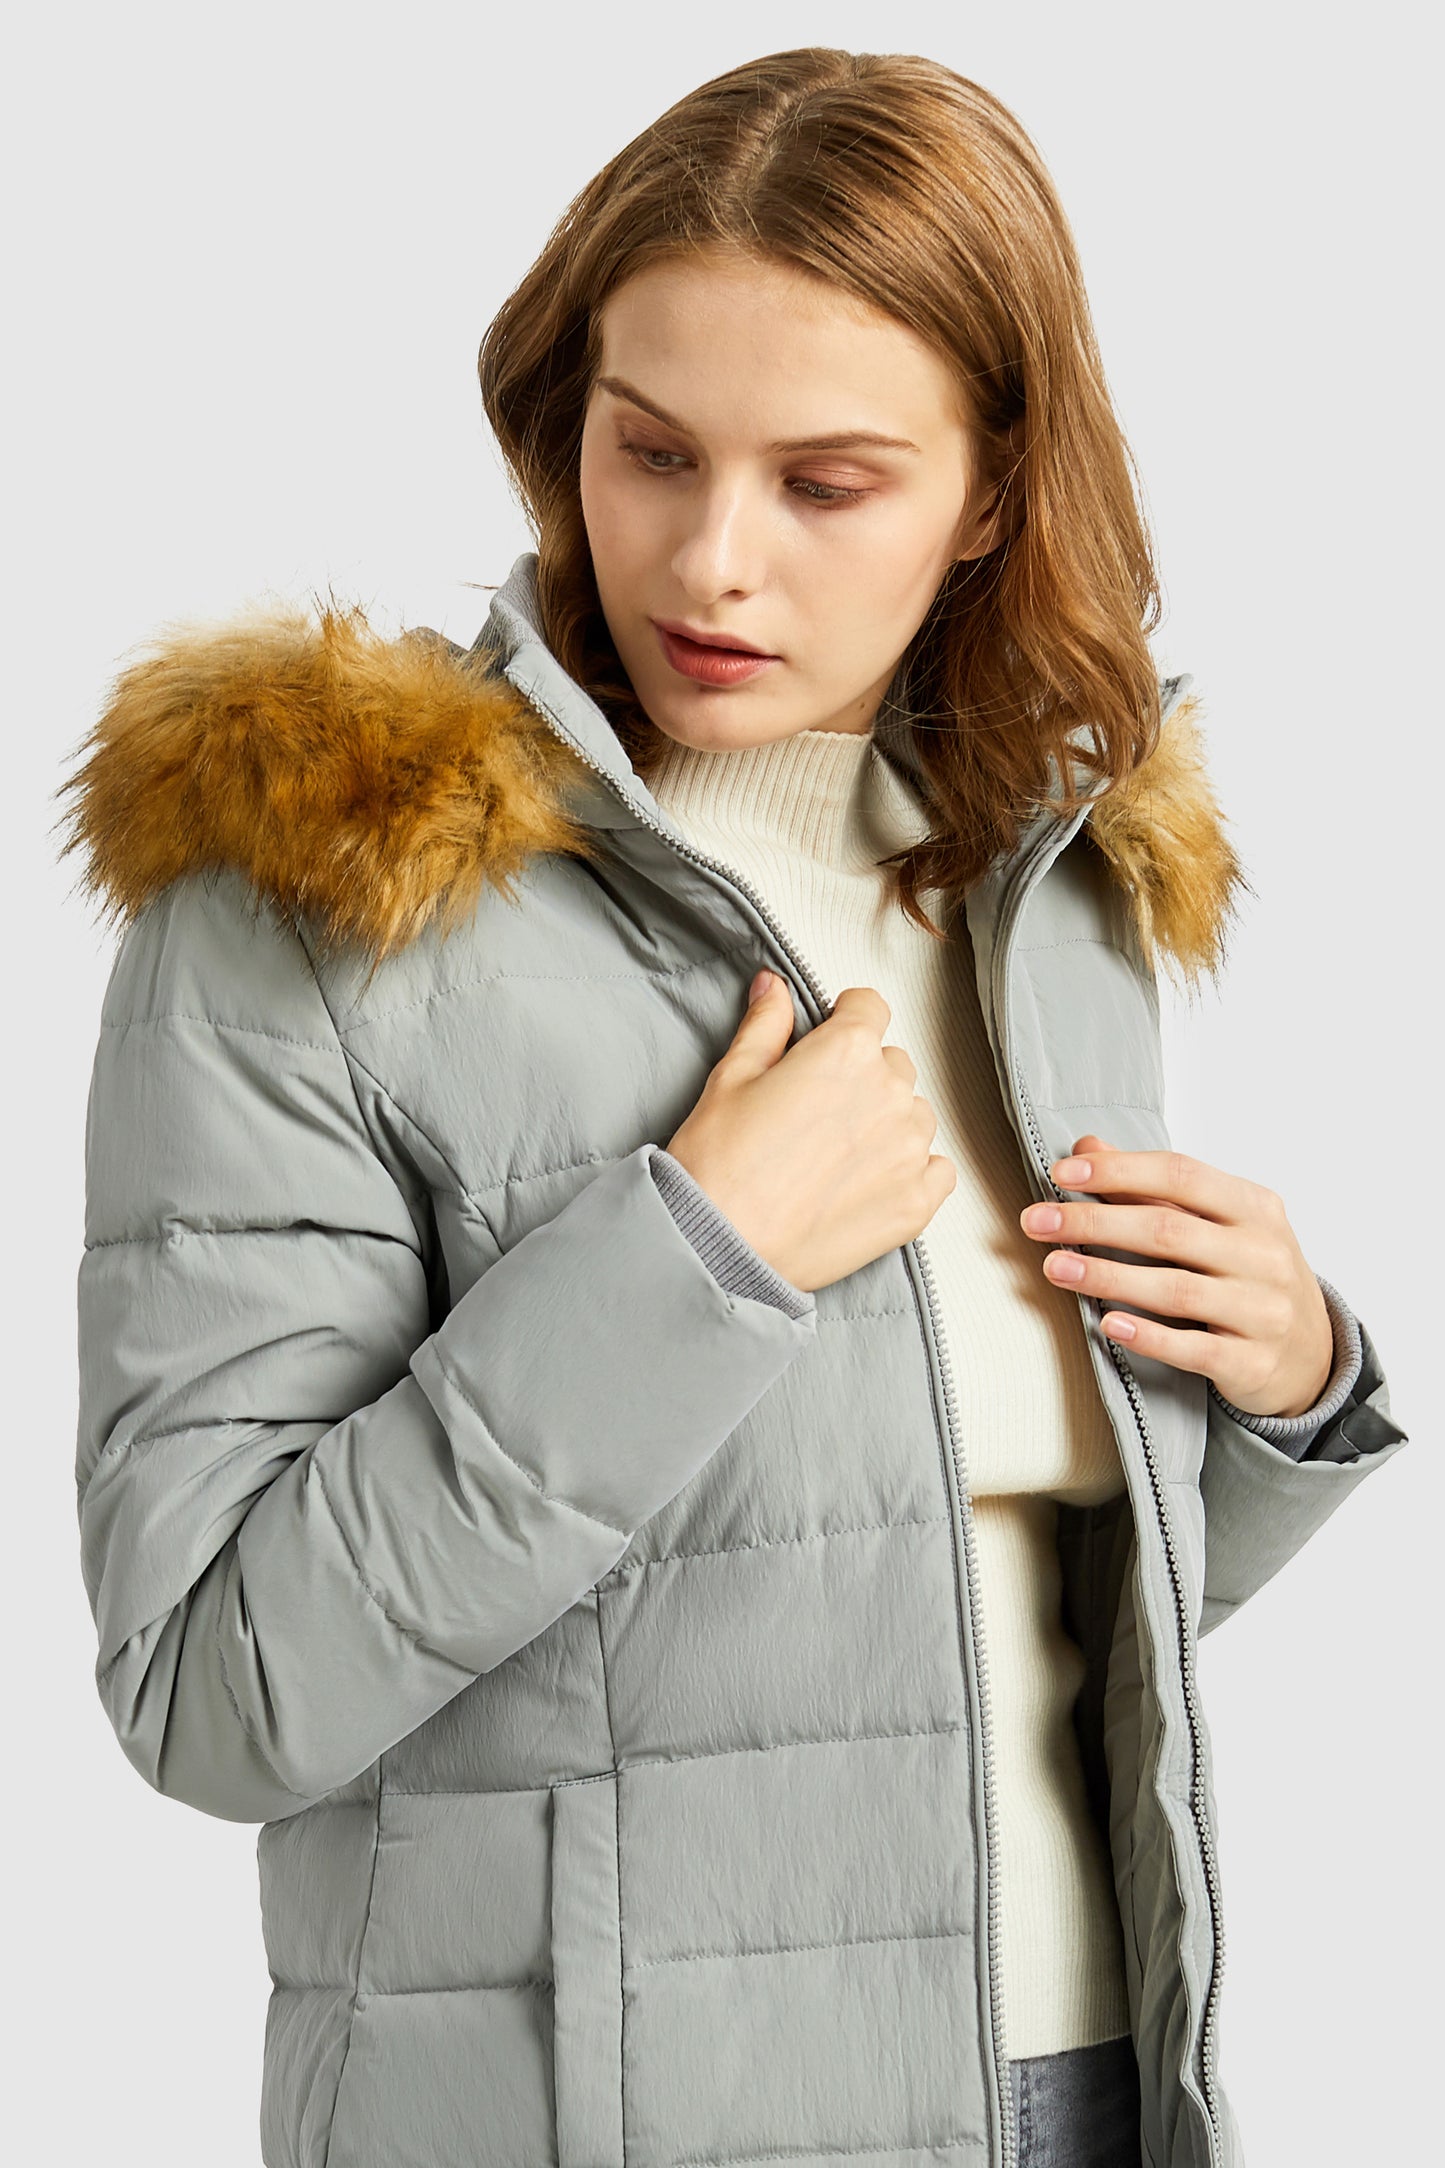 Packable Thickened Winter Down Coat